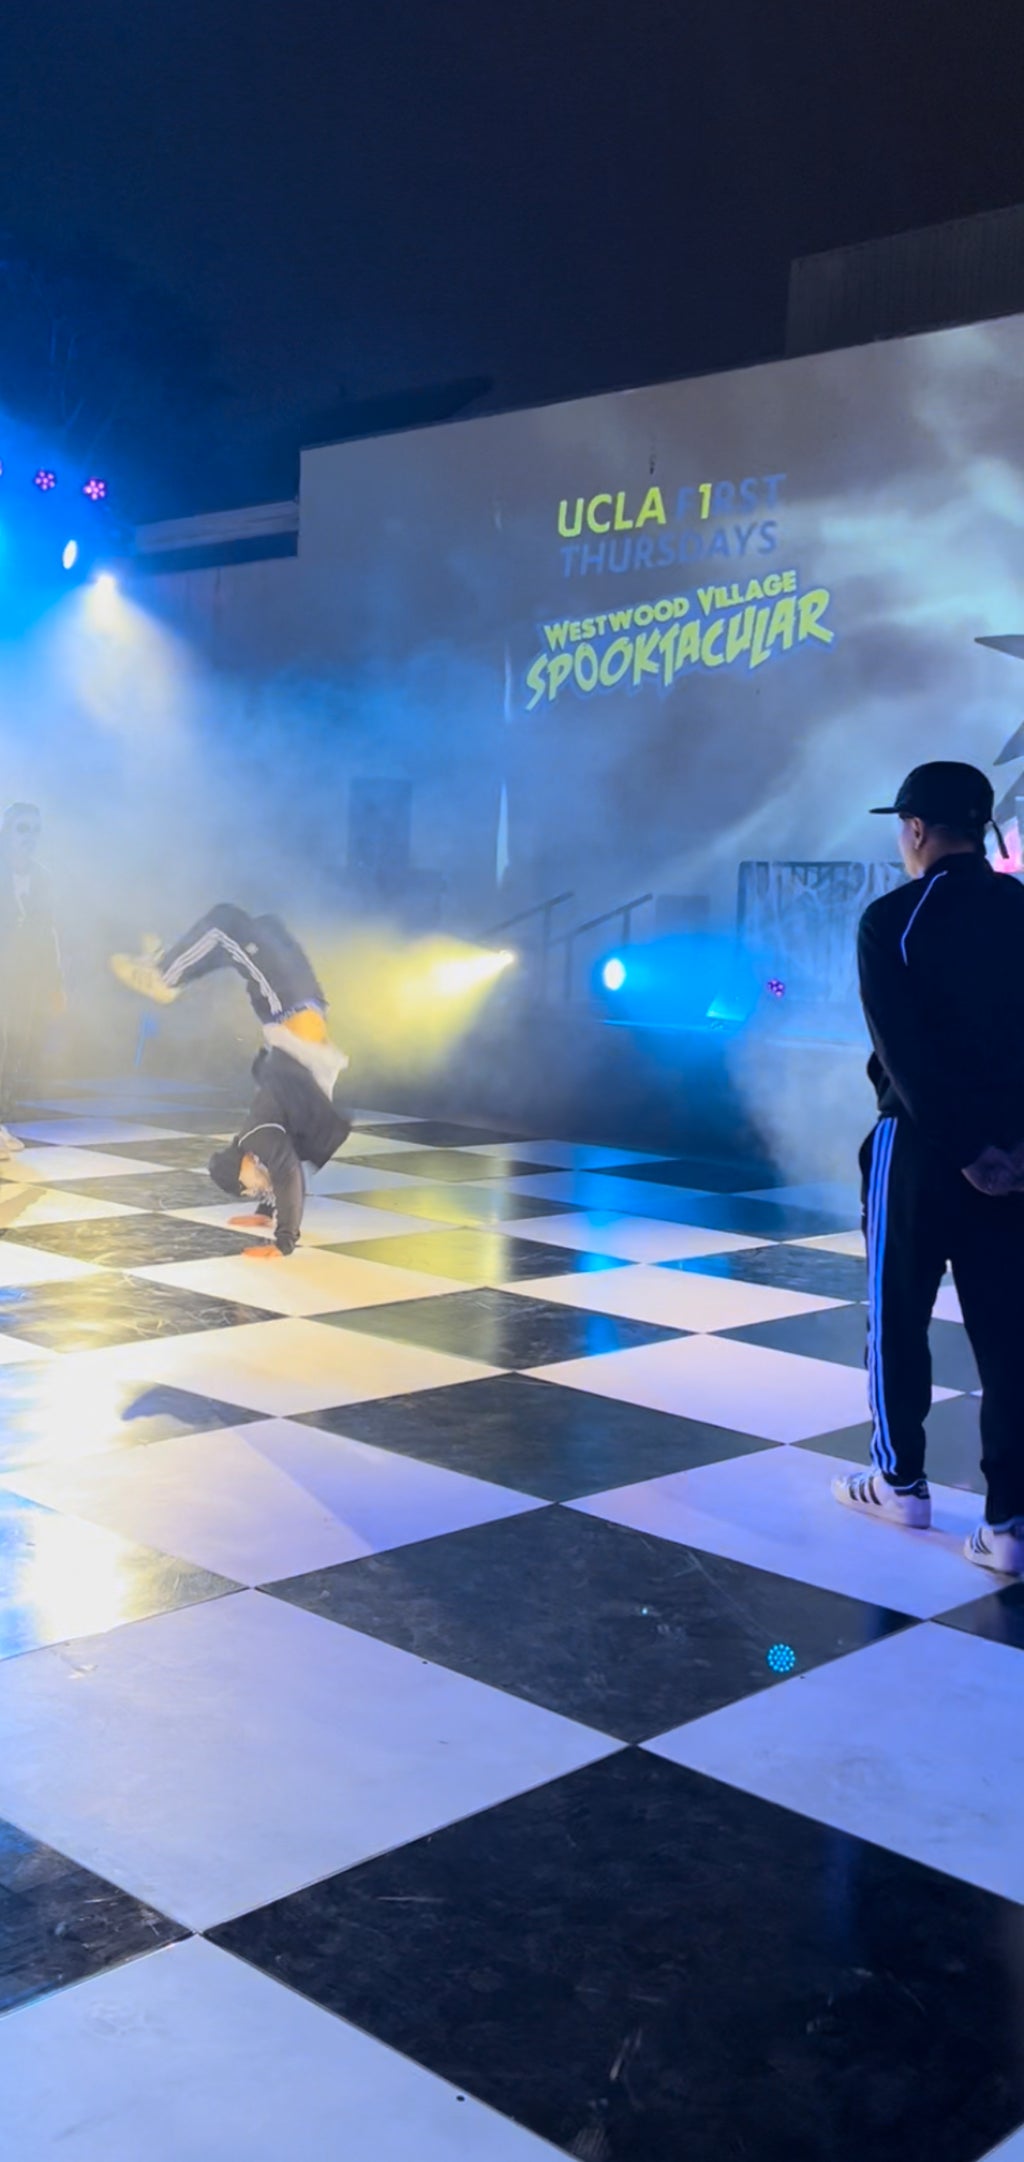 Performer doing a handstand on the dance floor.